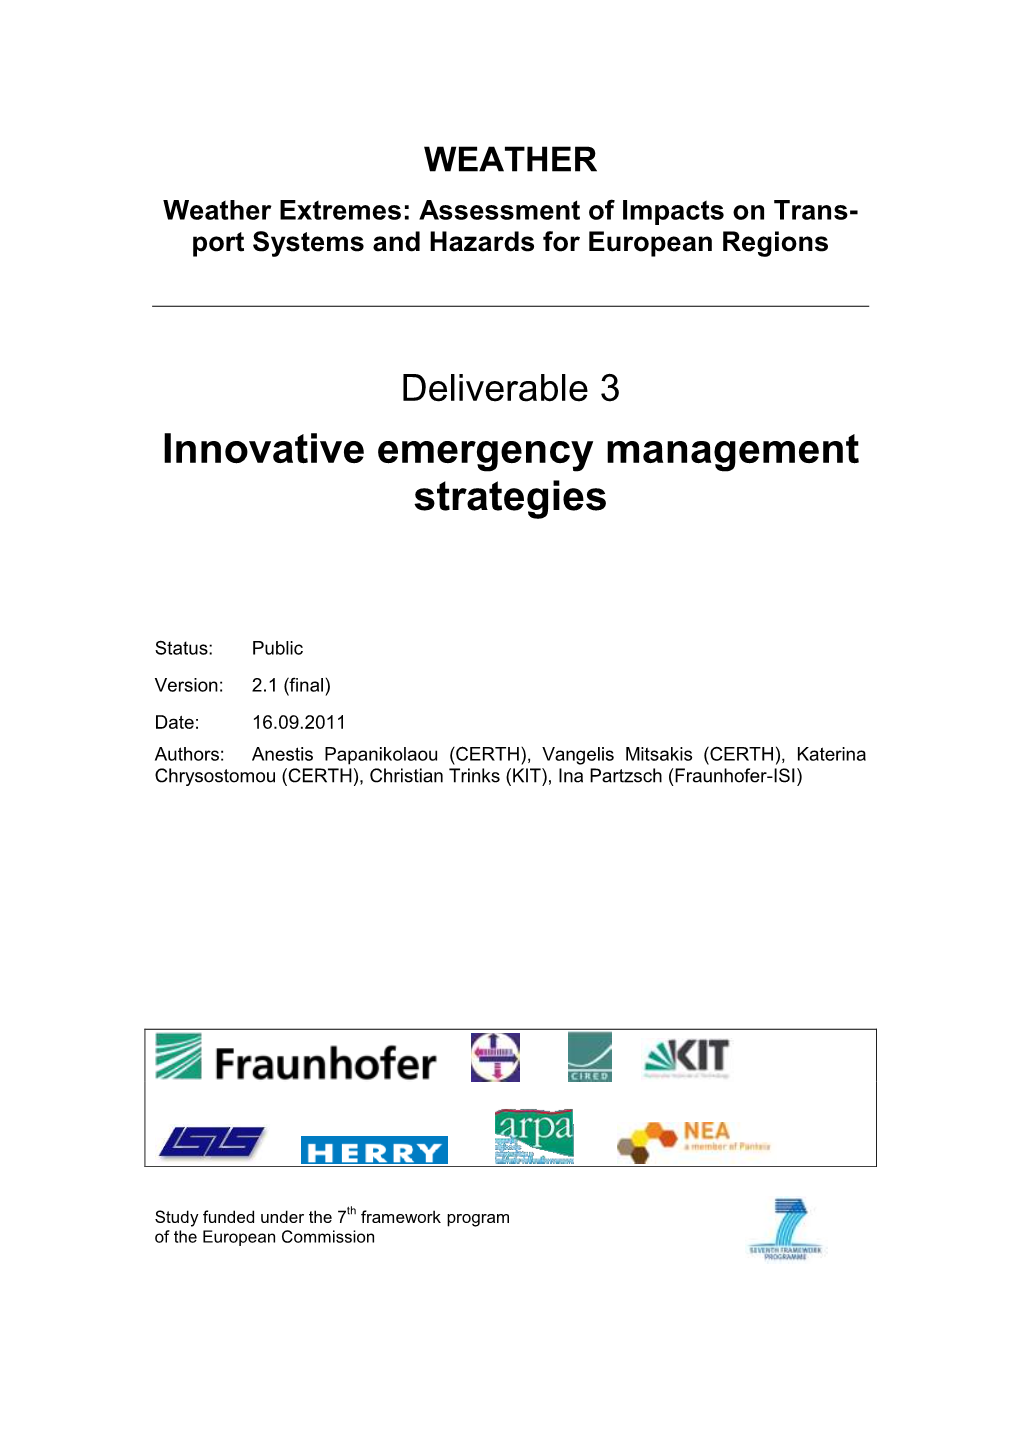 Deliverable 3 ‖Innovative Emergency Management Strategies‖, Which Has Been Specifically Designed to Address the Objectives of the WP3